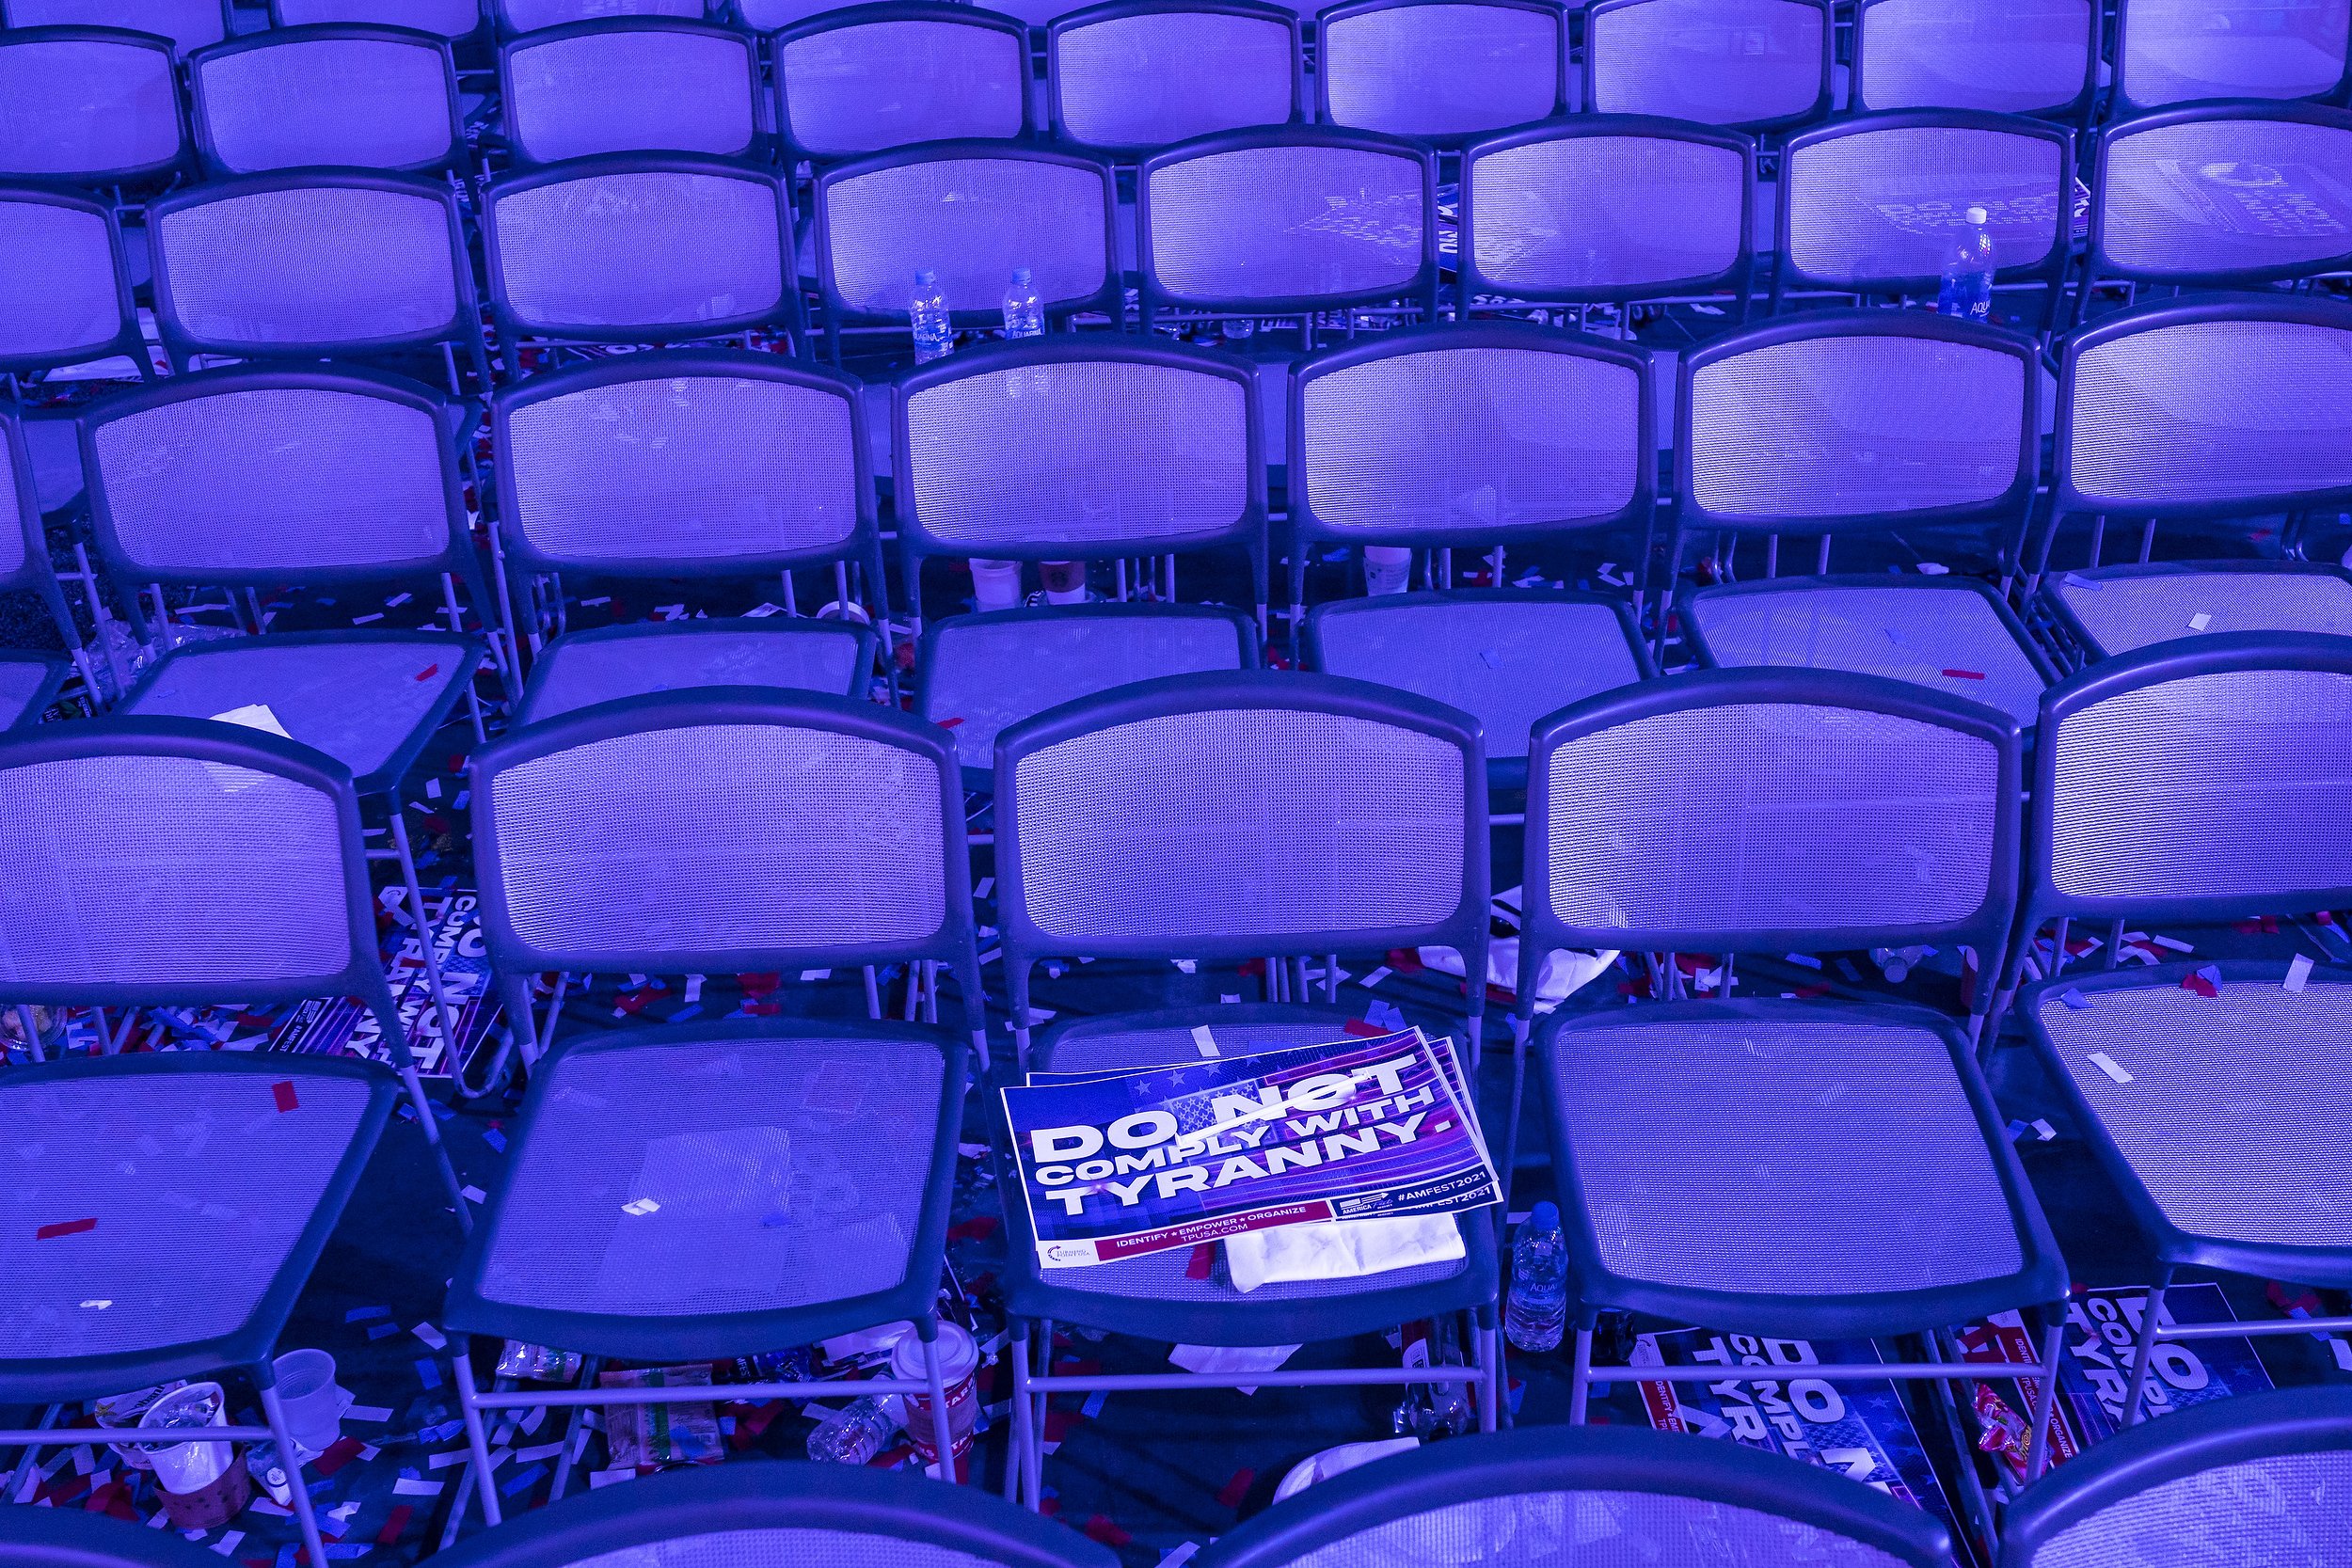  A sign reading "Do Not Comply With Tyranny" is left on a chair after attendees depart following the closing speaker during the second day of AmericaFest 2021 hosted by Turning Point USA on Sunday, Dec. 19, 2021, in Phoenix. The four day convention a